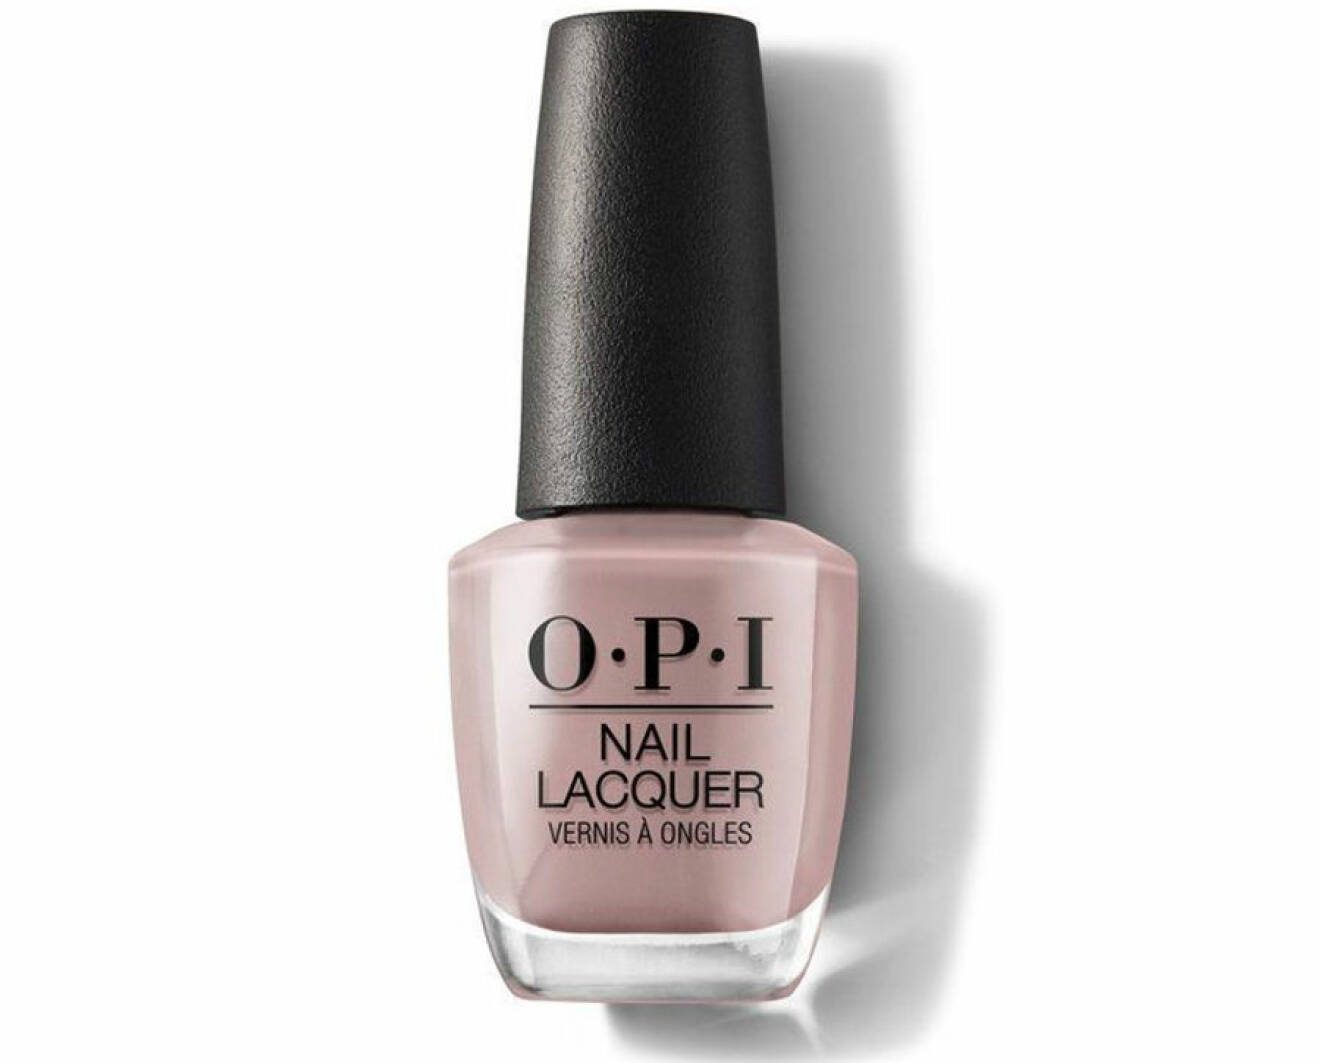 opi nagellack berlin there done that bästa greige nagellack